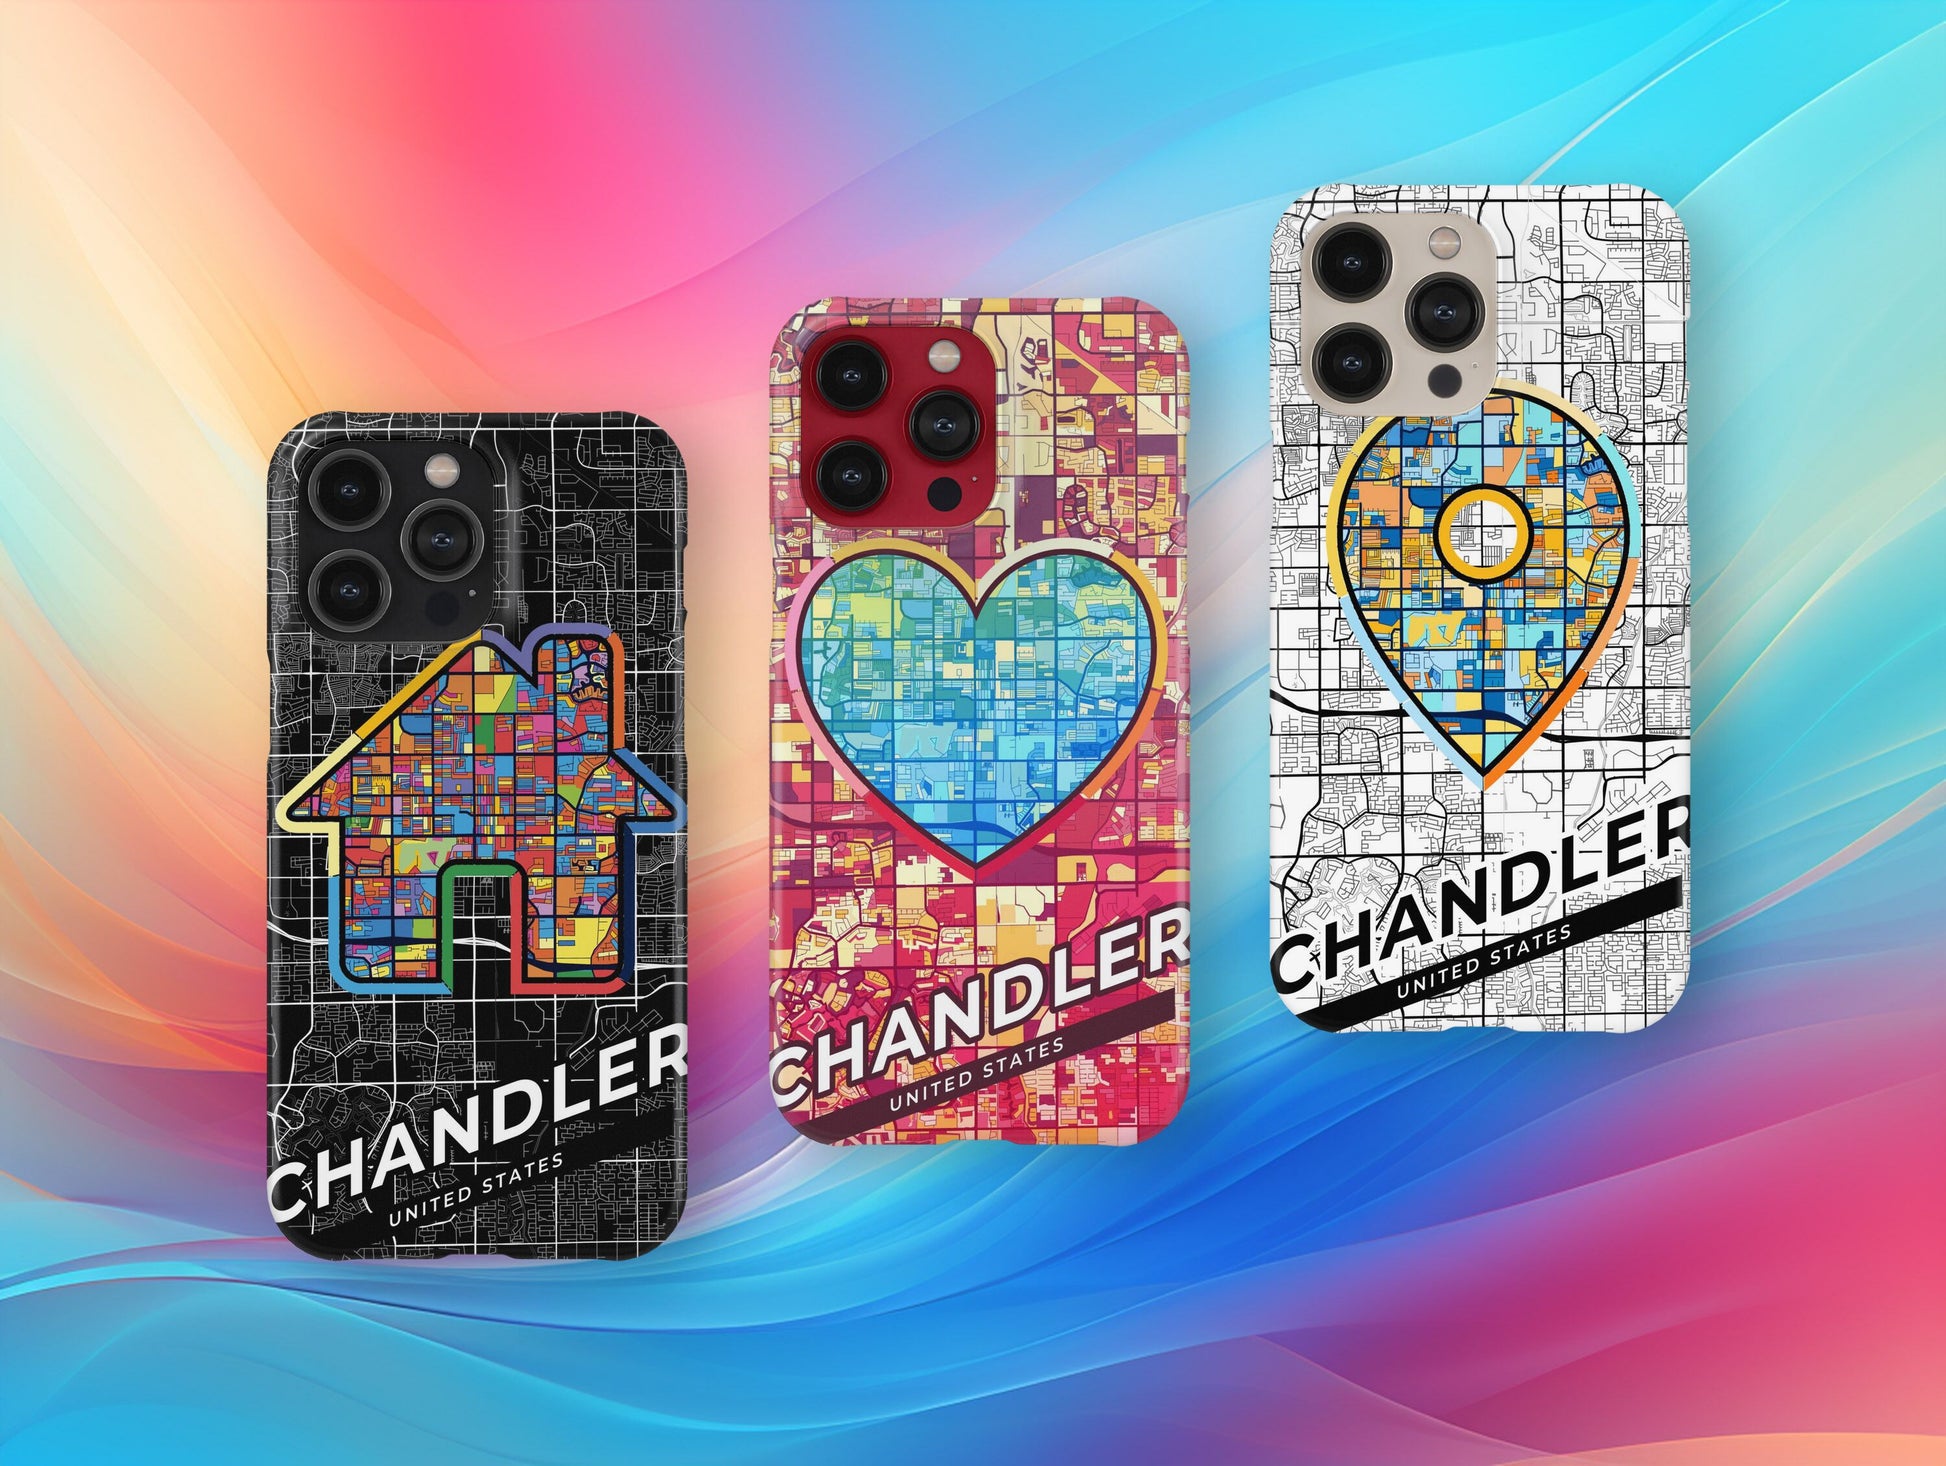 Chandler Arizona slim phone case with colorful icon. Birthday, wedding or housewarming gift. Couple match cases.